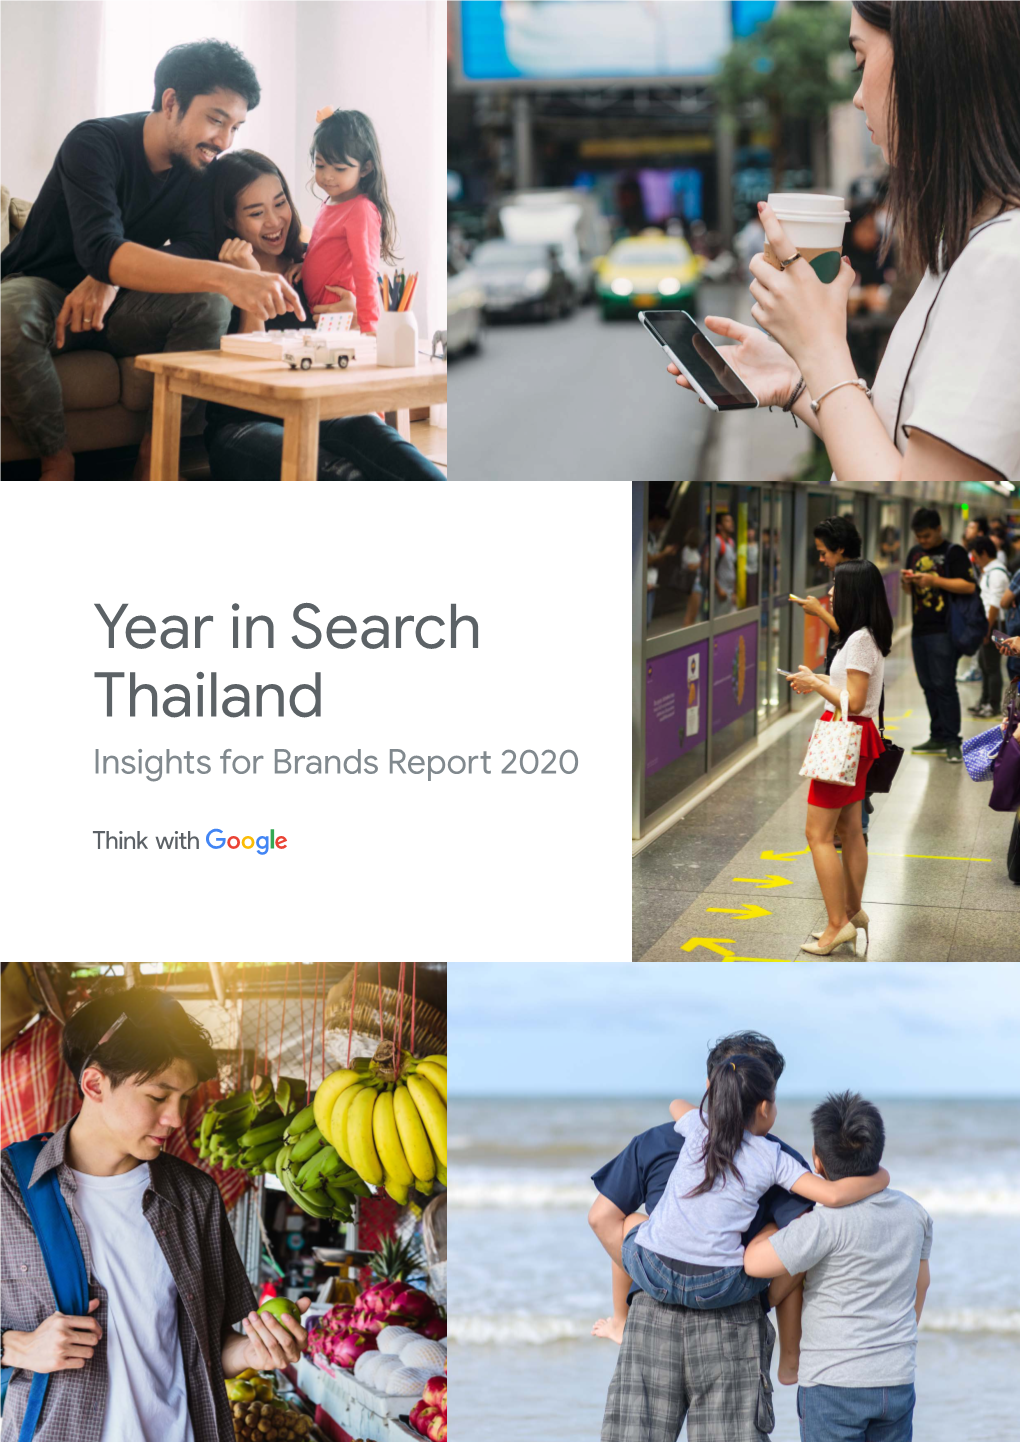 Year in Search Thailand Insights for Brands Report 2020